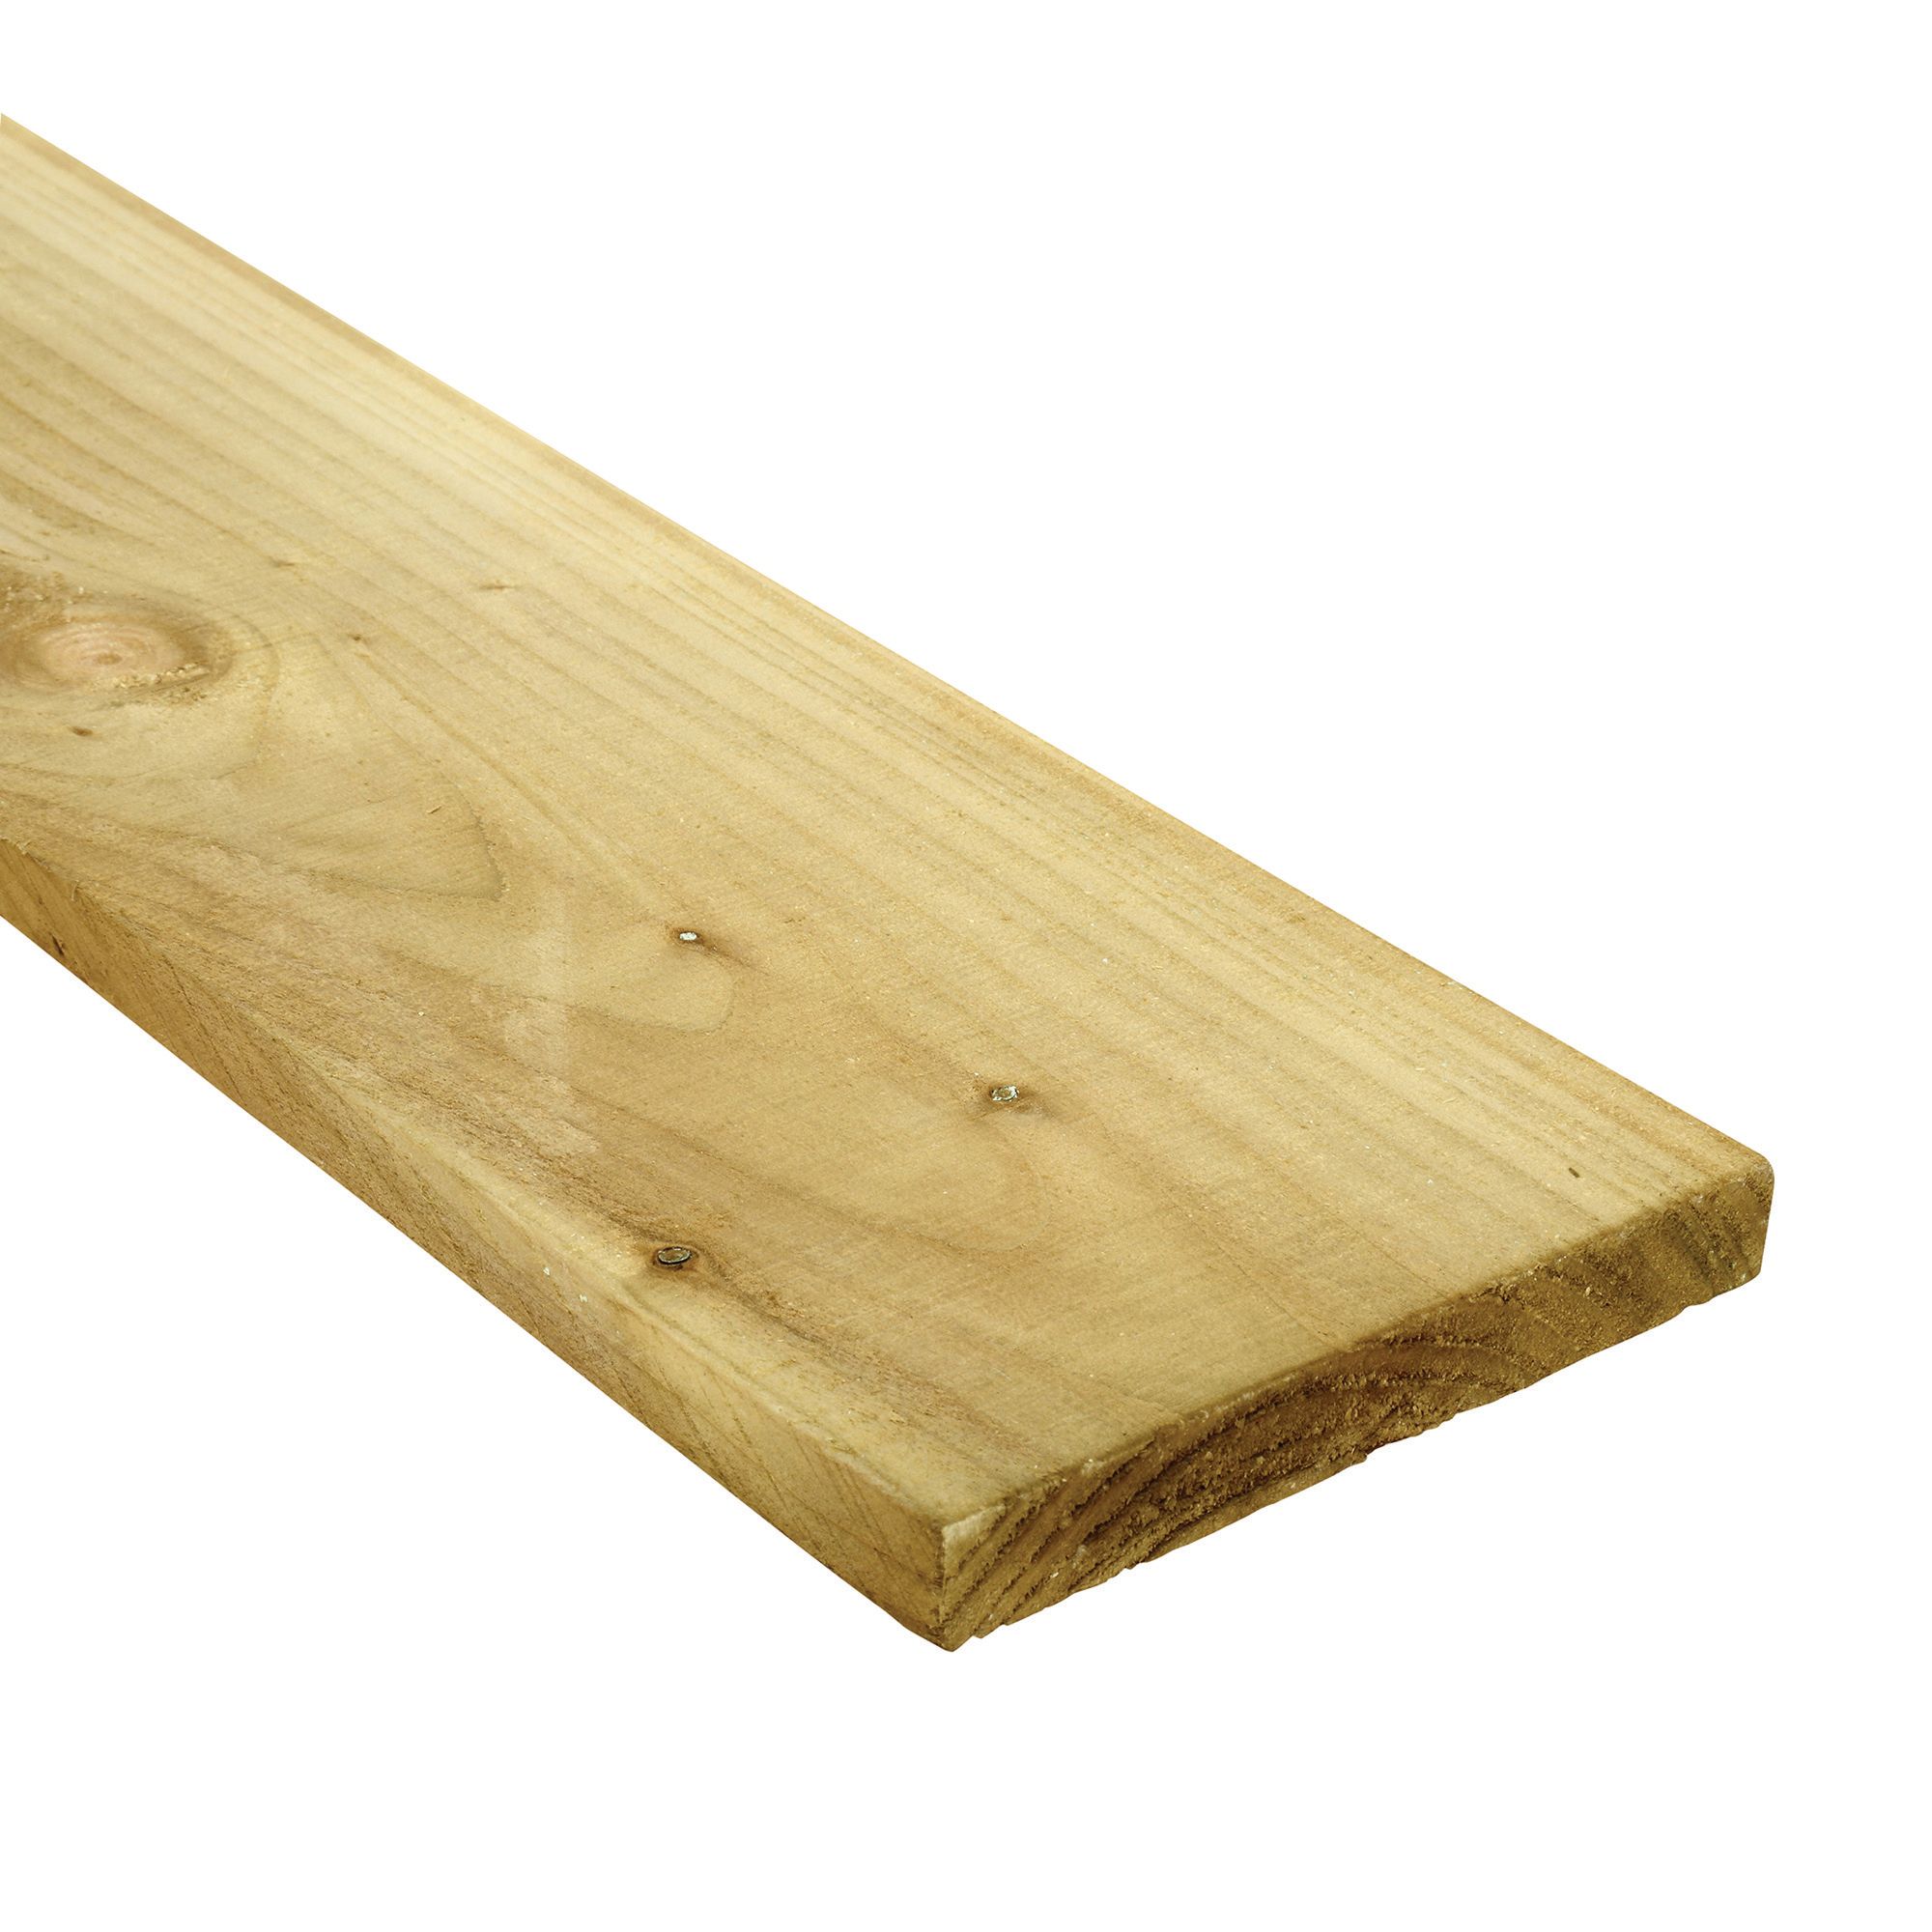 Image of Wickes Treated Timber Gravel Board - 19mm x 150mm x 1.83m